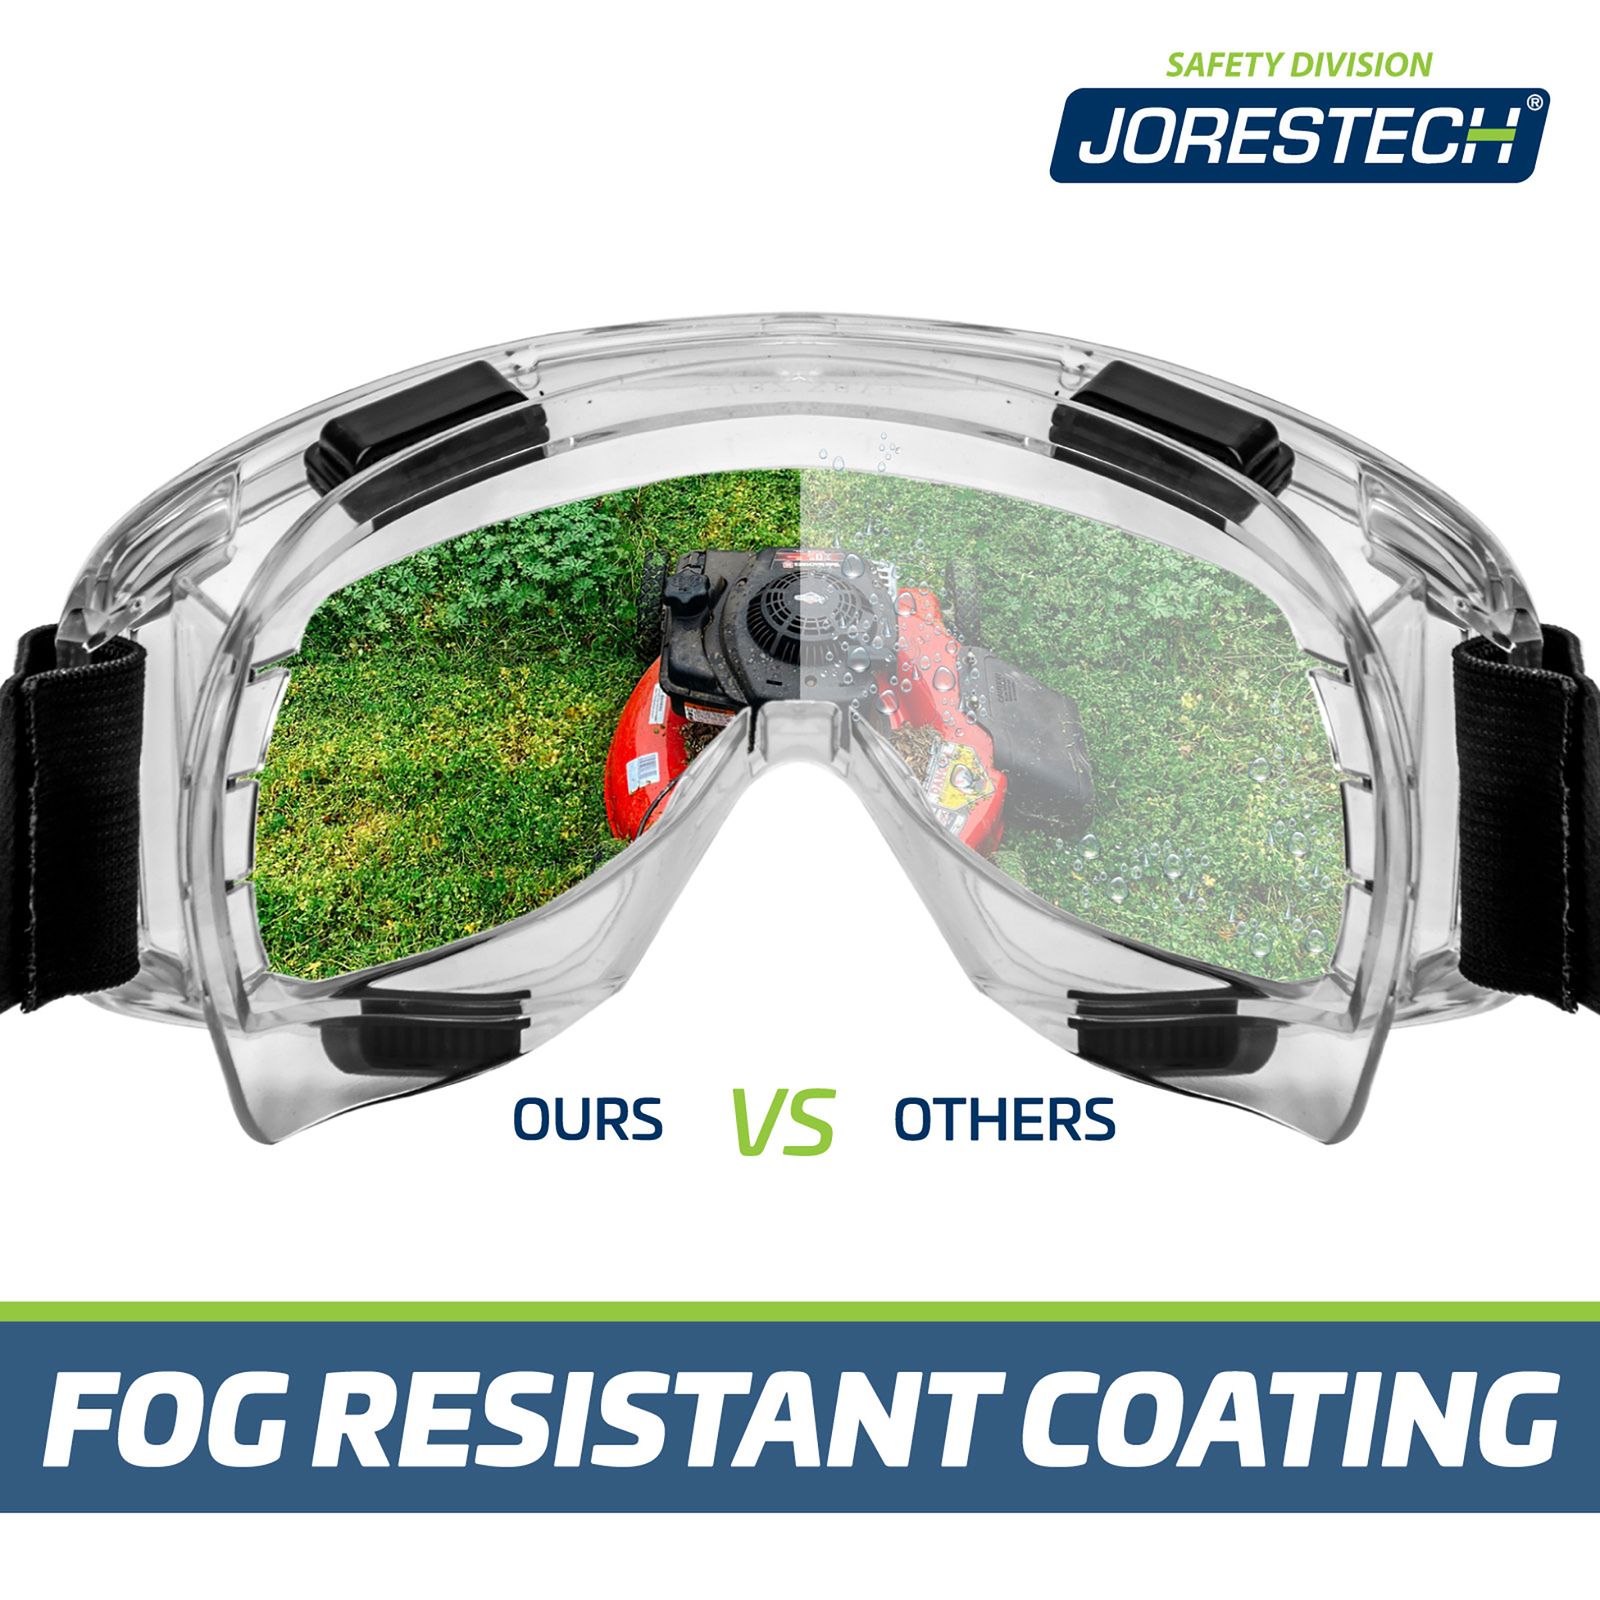 Features 2 side of the goggles to make a comparison of the JORESTECH goggles versus the others. The right side part of the goggle is crisp clear. The left side is foggy and blur. Text reads: Ours vs Others. Ours with fog resistant coating.